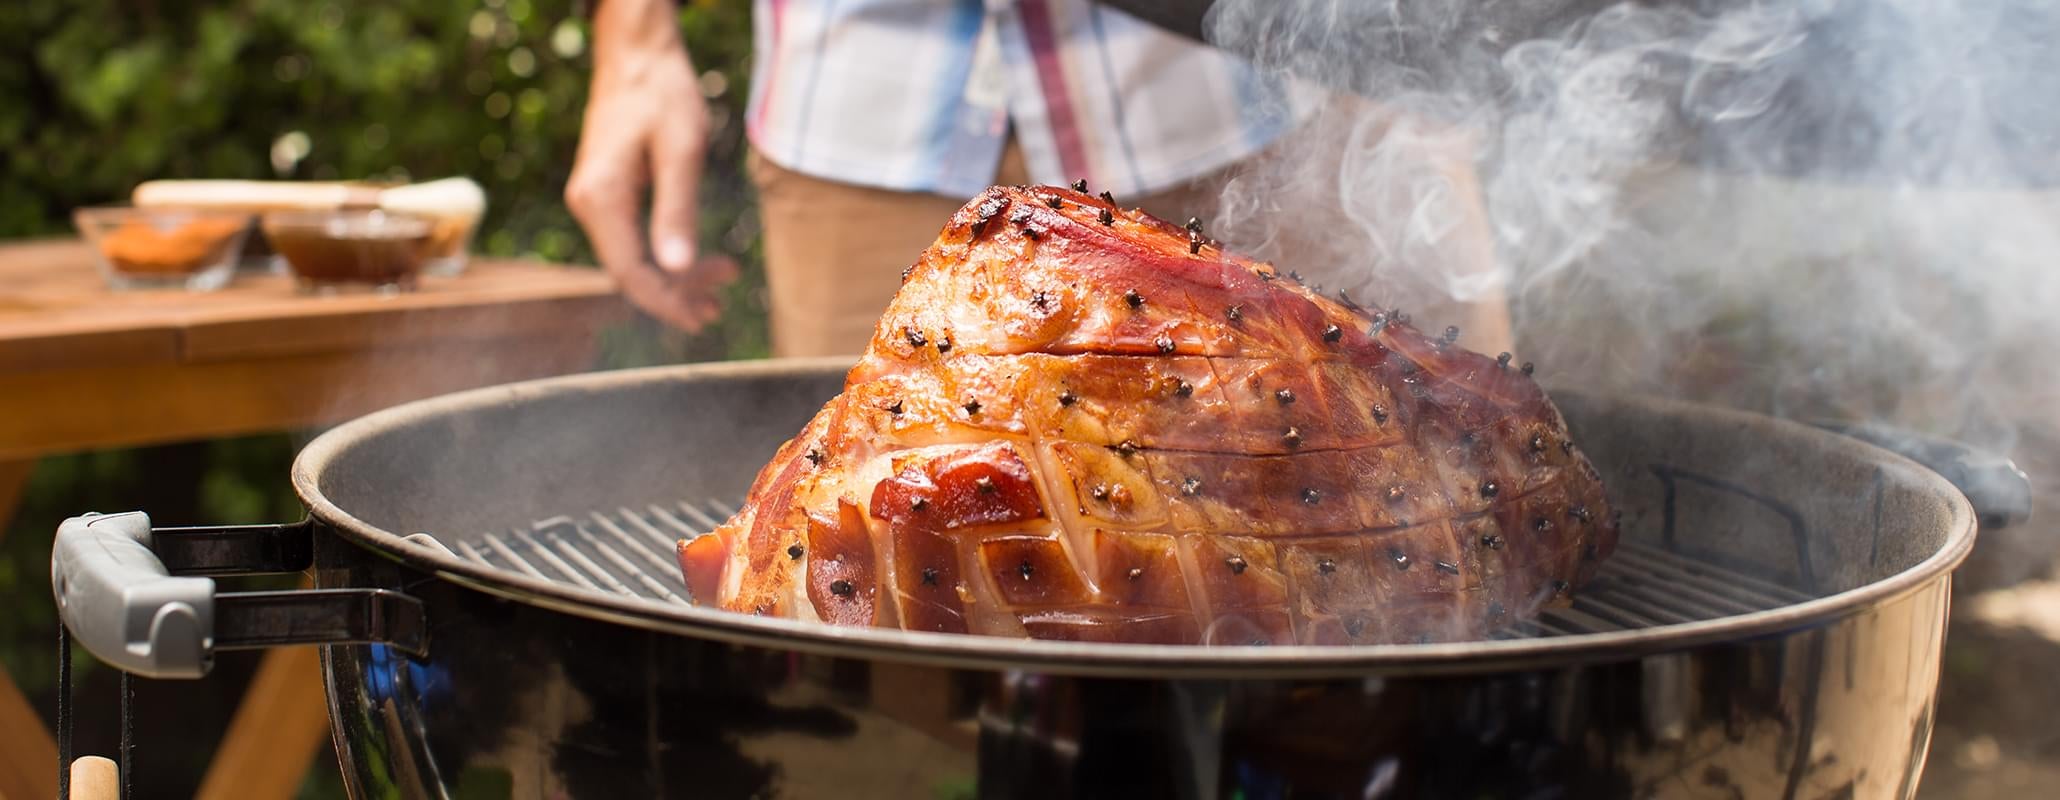 Our Best Double Smoked Ham With Glaze Recipe Kingsford,How To Clean Hats With Sweat Stains